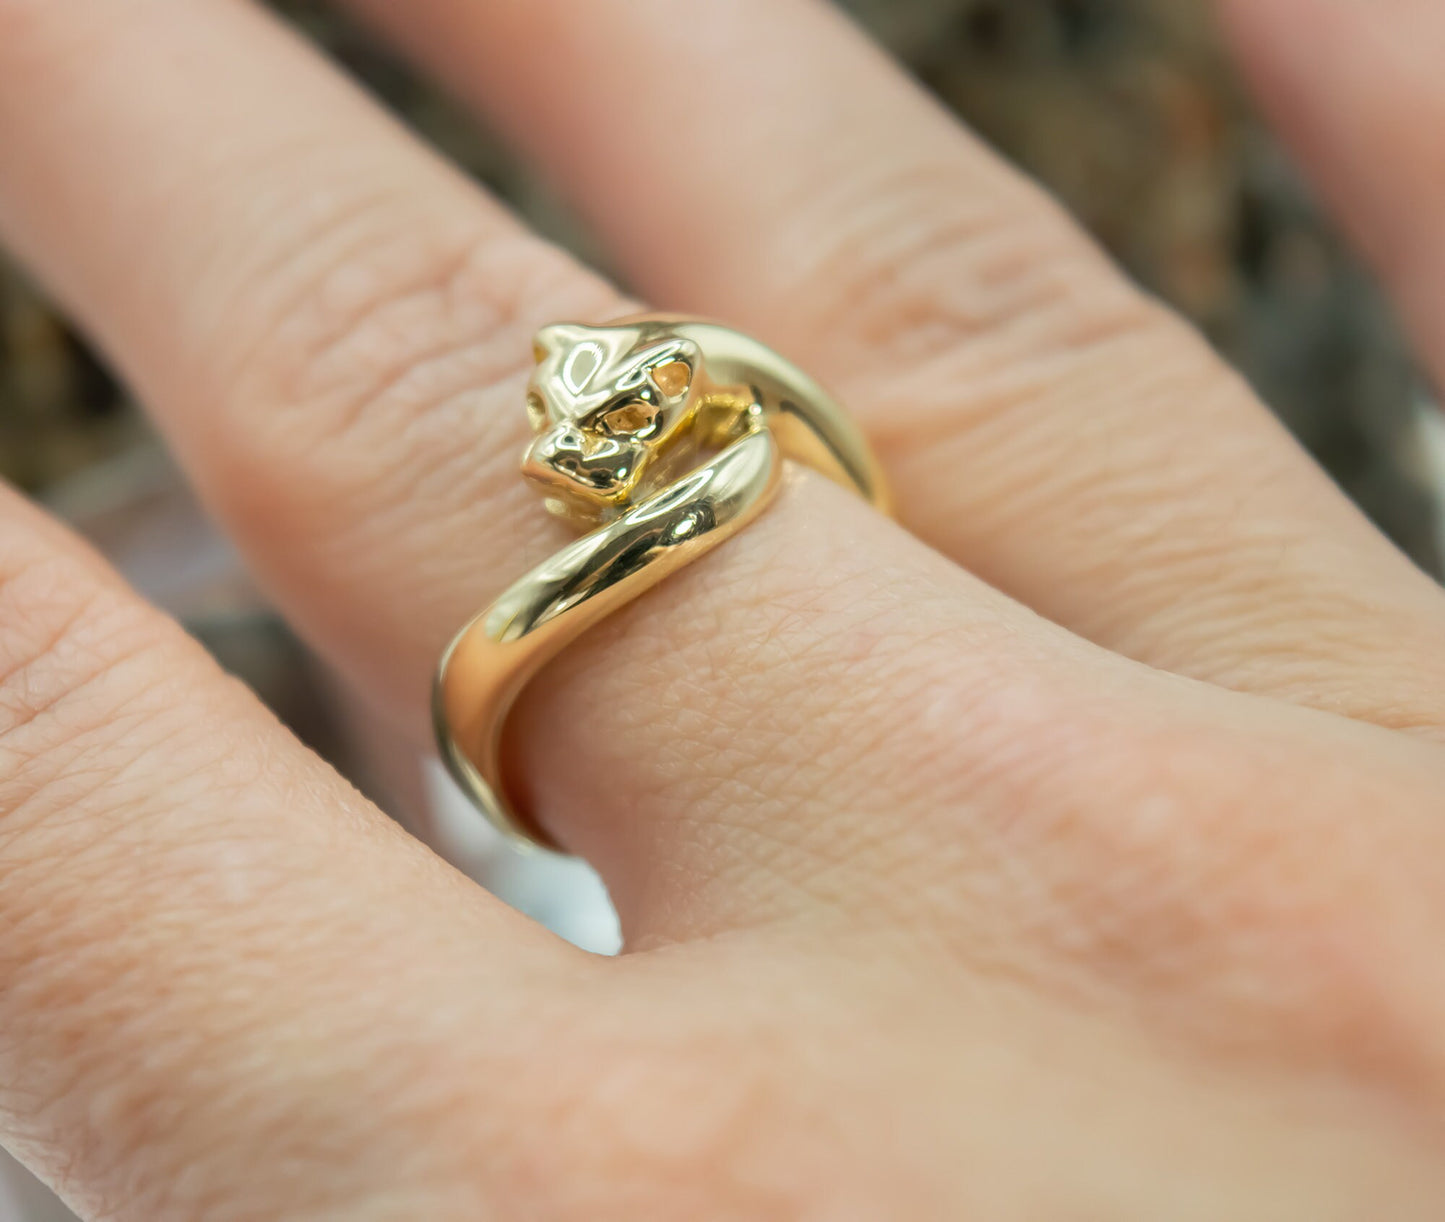 Solid 14K Yellow Gold Cougar, Panther, Cat Statement Ring Size 7